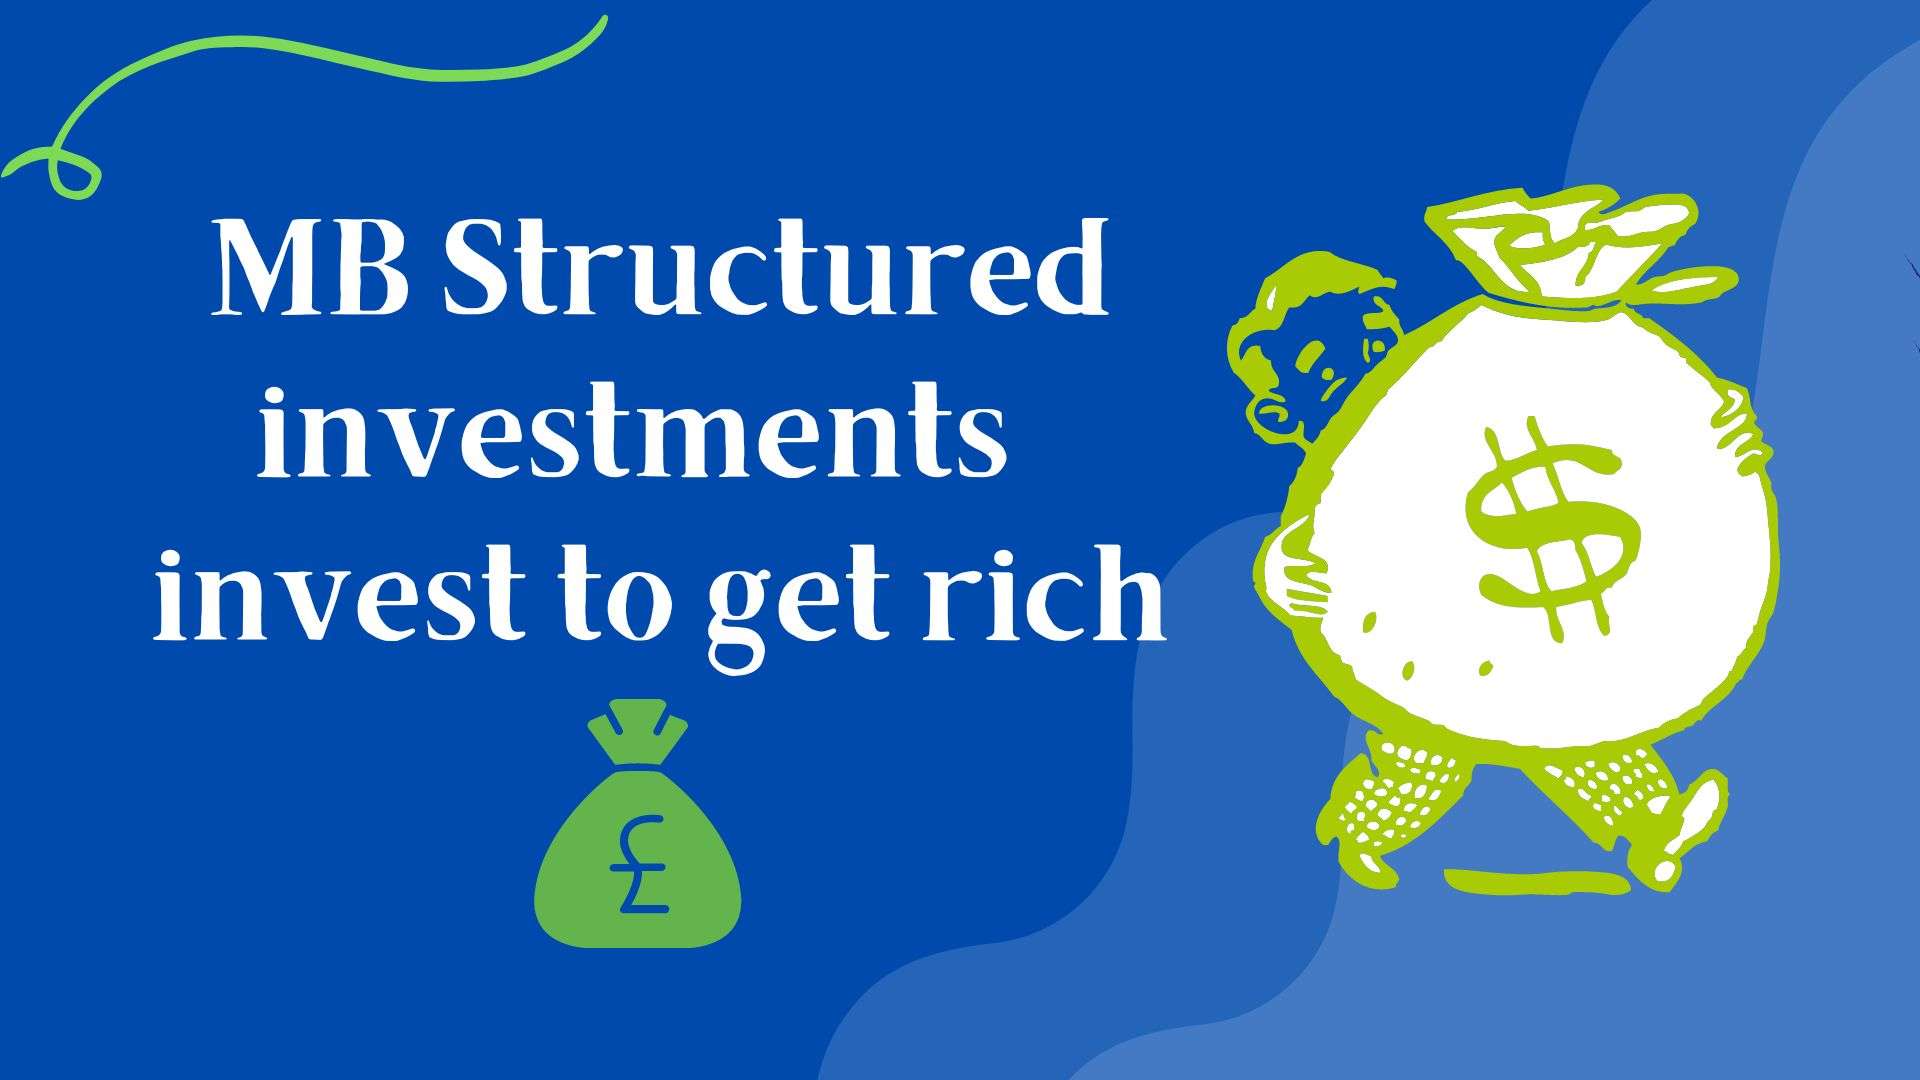 Mb structured investments